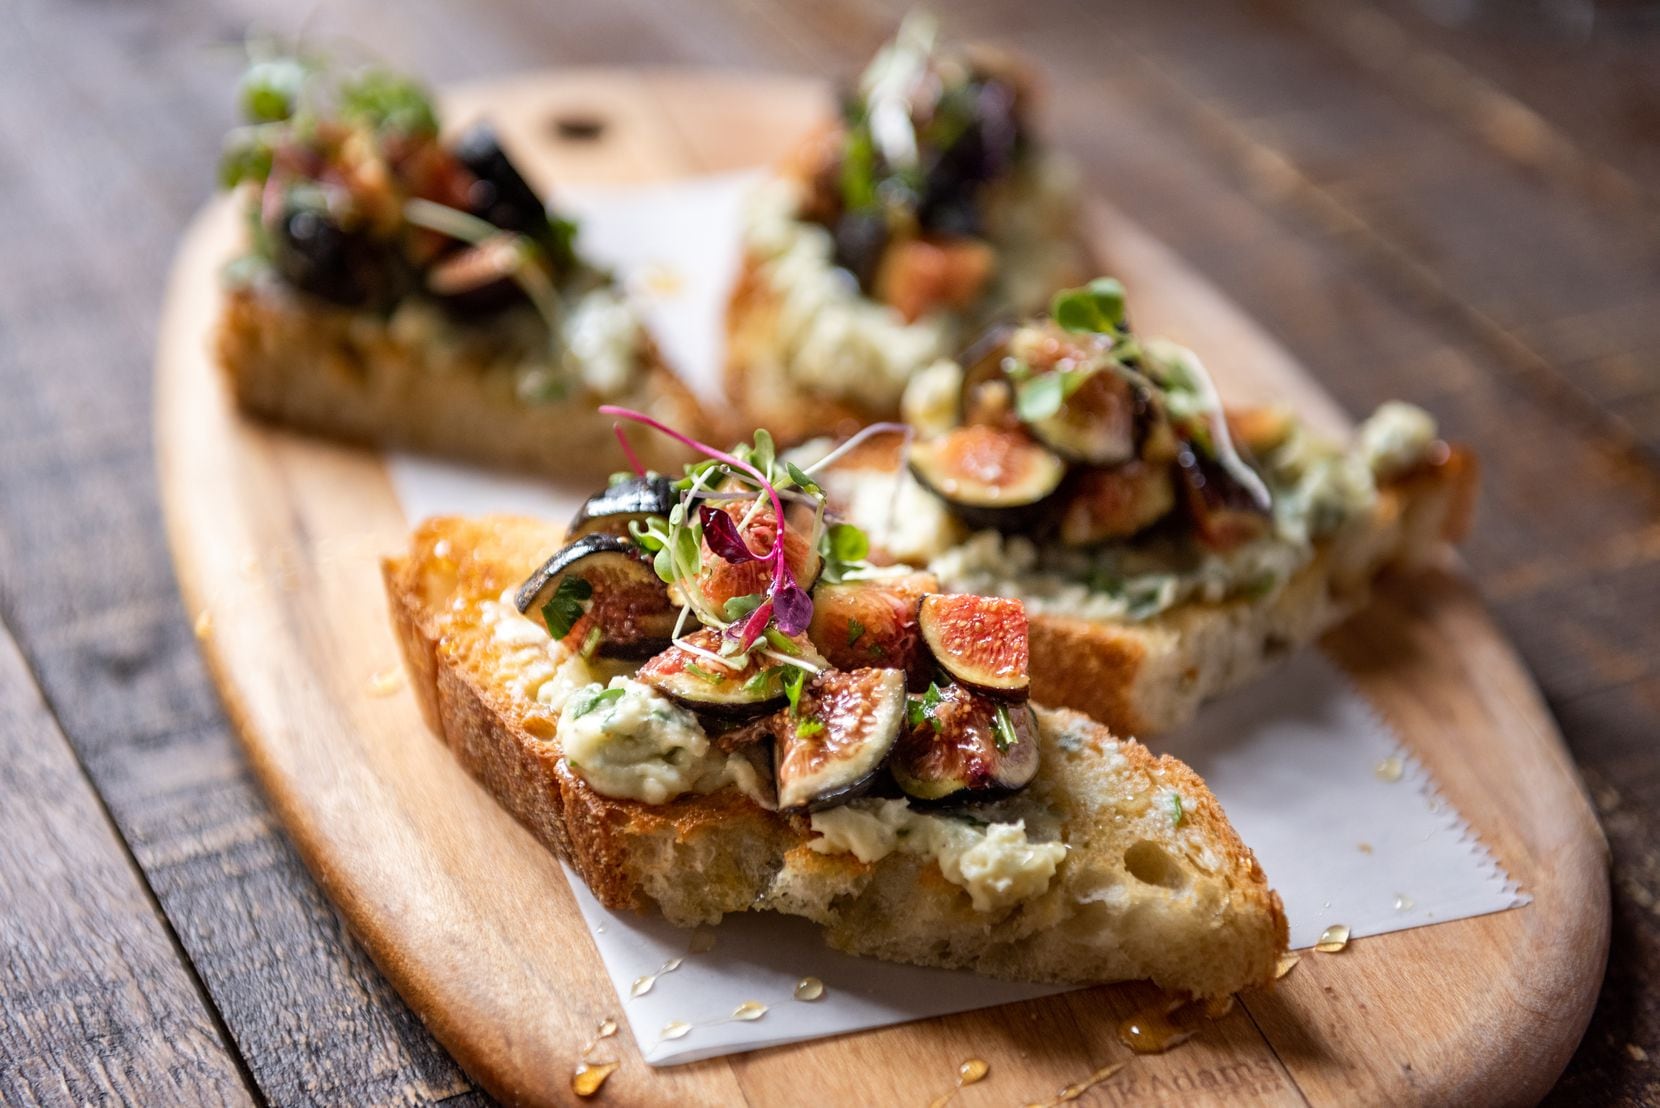 Cru Food and Wine Bar offers fresh fig and gorgonzola bruschetta as part of its Father's Day brunch.